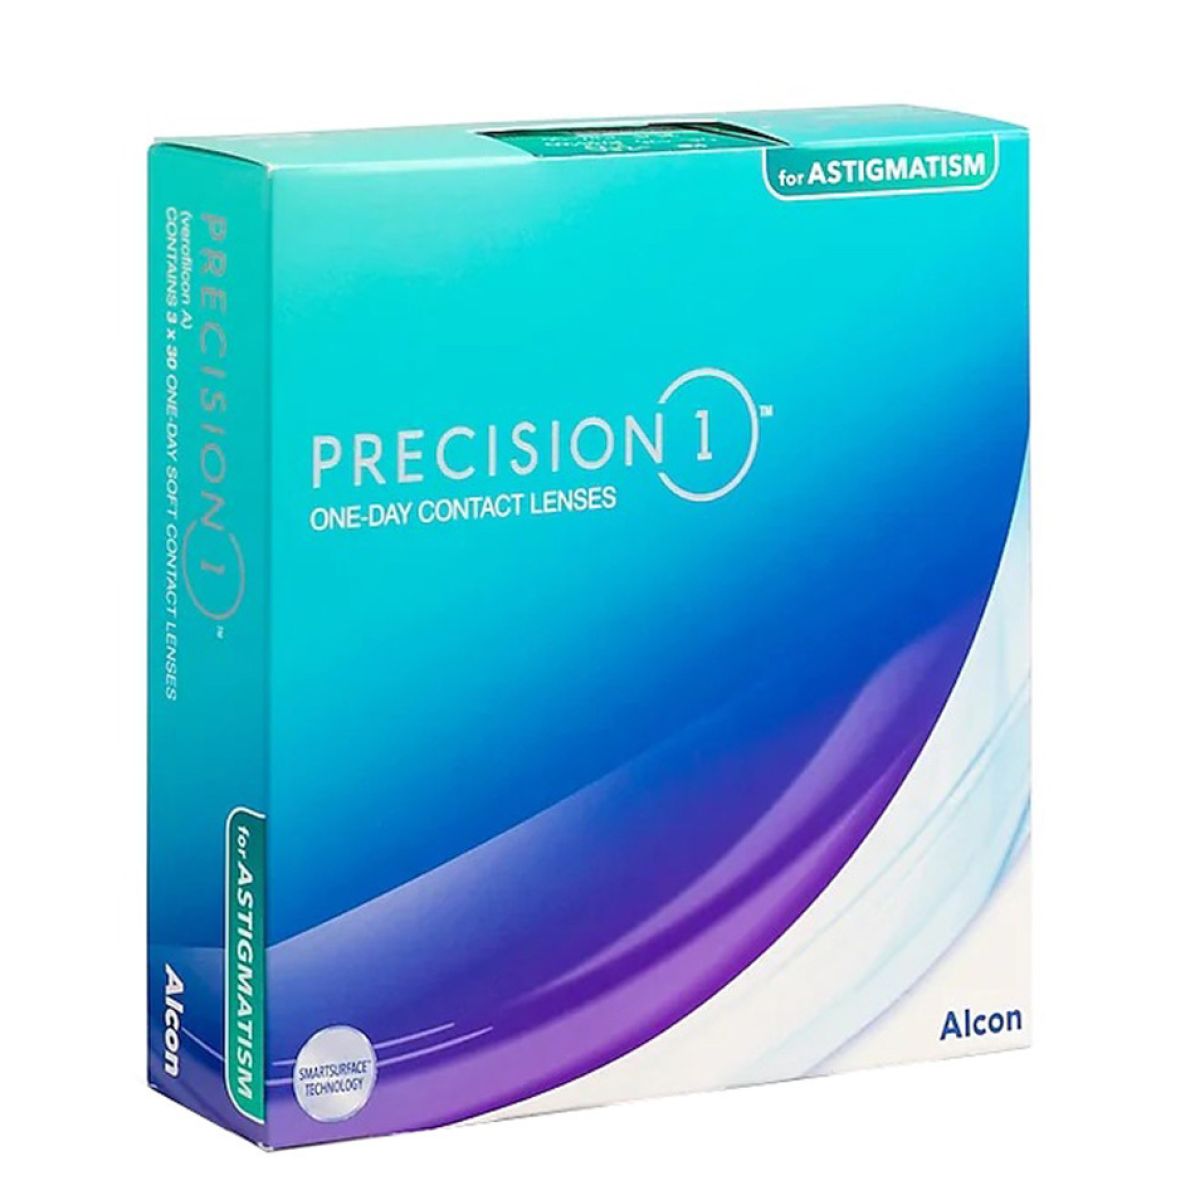 PRECISION 1 FOR ASTIGMATISM DAILY DISPOSABLE CONTACT LENSES (90 LENSES)